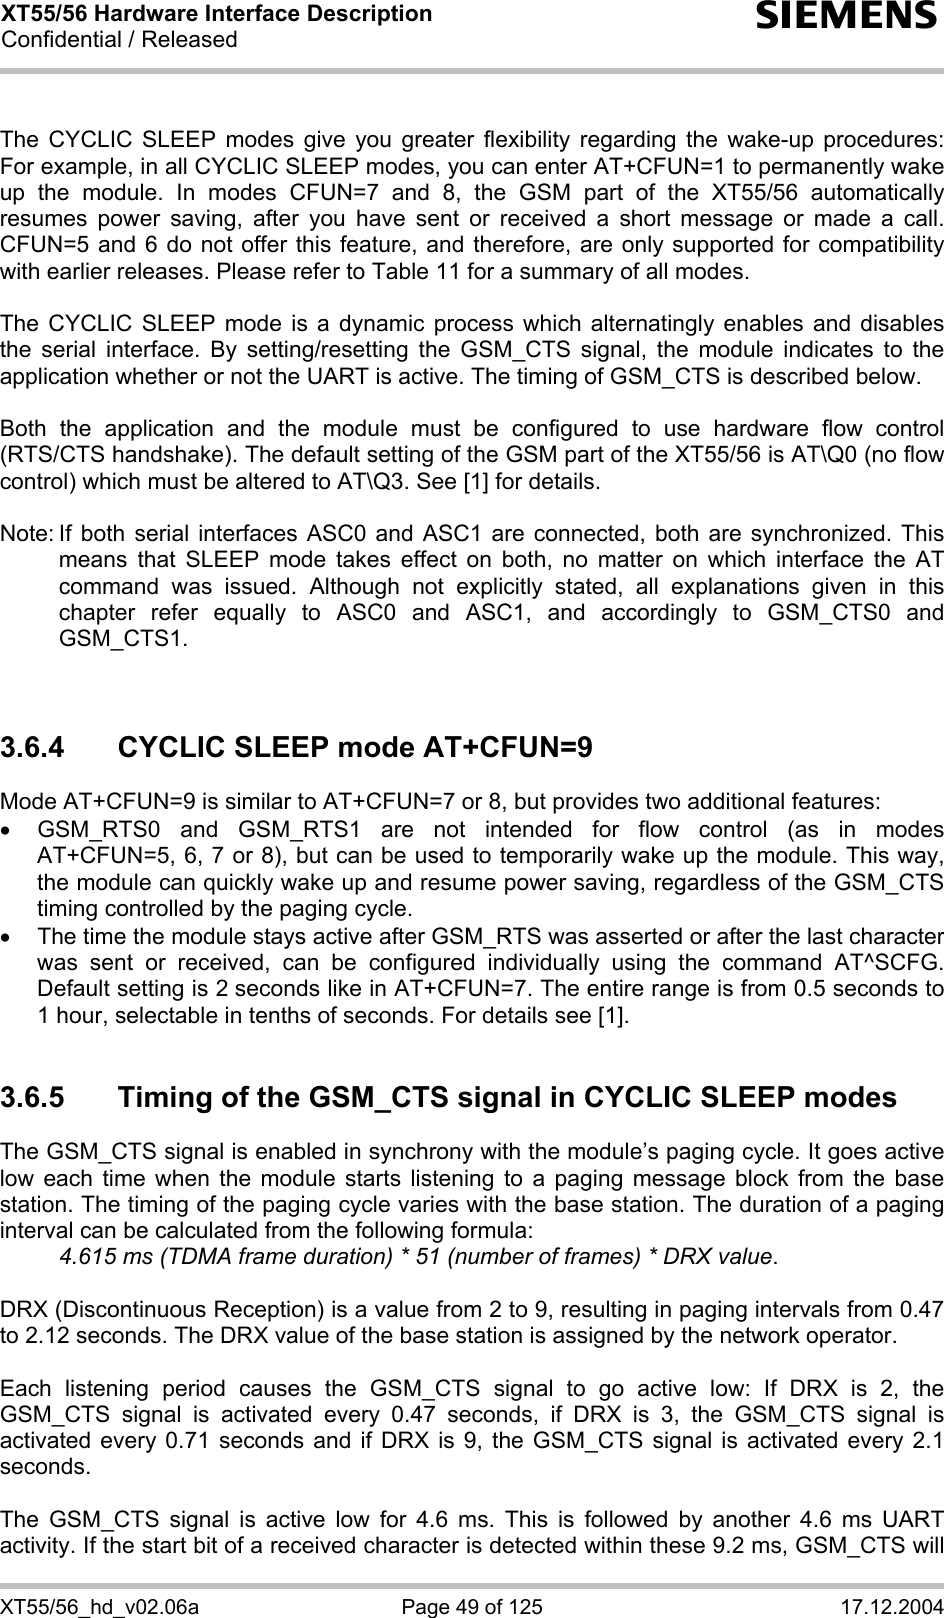 XT55/56 Hardware Interface Description Confidential / Released s XT55/56_hd_v02.06a  Page 49 of 125  17.12.2004  The CYCLIC SLEEP modes give you greater flexibility regarding the wake-up procedures: For example, in all CYCLIC SLEEP modes, you can enter AT+CFUN=1 to permanently wake up the module. In modes CFUN=7 and 8, the GSM part of the XT55/56 automatically resumes power saving, after you have sent or received a short message or made a call. CFUN=5 and 6 do not offer this feature, and therefore, are only supported for compatibility with earlier releases. Please refer to Table 11 for a summary of all modes.  The CYCLIC SLEEP mode is a dynamic process which alternatingly enables and disables the serial interface. By setting/resetting the GSM_CTS signal, the module indicates to the application whether or not the UART is active. The timing of GSM_CTS is described below.   Both the application and the module must be configured to use hardware flow control (RTS/CTS handshake). The default setting of the GSM part of the XT55/56 is AT\Q0 (no flow control) which must be altered to AT\Q3. See [1] for details.  Note: If both serial interfaces ASC0 and ASC1 are connected, both are synchronized. This means that SLEEP mode takes effect on both, no matter on which interface the AT command was issued. Although not explicitly stated, all explanations given in this chapter refer equally to ASC0 and ASC1, and accordingly to GSM_CTS0 and GSM_CTS1.    3.6.4  CYCLIC SLEEP mode AT+CFUN=9 Mode AT+CFUN=9 is similar to AT+CFUN=7 or 8, but provides two additional features:  •  GSM_RTS0 and GSM_RTS1 are not intended for flow control (as in modes AT+CFUN=5, 6, 7 or 8), but can be used to temporarily wake up the module. This way, the module can quickly wake up and resume power saving, regardless of the GSM_CTS timing controlled by the paging cycle. •  The time the module stays active after GSM_RTS was asserted or after the last character was sent or received, can be configured individually using the command AT^SCFG. Default setting is 2 seconds like in AT+CFUN=7. The entire range is from 0.5 seconds to 1 hour, selectable in tenths of seconds. For details see [1].  3.6.5  Timing of the GSM_CTS signal in CYCLIC SLEEP modes The GSM_CTS signal is enabled in synchrony with the module’s paging cycle. It goes active low each time when the module starts listening to a paging message block from the base station. The timing of the paging cycle varies with the base station. The duration of a paging interval can be calculated from the following formula:  4.615 ms (TDMA frame duration) * 51 (number of frames) * DRX value.   DRX (Discontinuous Reception) is a value from 2 to 9, resulting in paging intervals from 0.47 to 2.12 seconds. The DRX value of the base station is assigned by the network operator.   Each listening period causes the GSM_CTS signal to go active low: If DRX is 2, the GSM_CTS signal is activated every 0.47 seconds, if DRX is 3, the GSM_CTS signal is activated every 0.71 seconds and if DRX is 9, the GSM_CTS signal is activated every 2.1 seconds.  The GSM_CTS signal is active low for 4.6 ms. This is followed by another 4.6 ms UART activity. If the start bit of a received character is detected within these 9.2 ms, GSM_CTS will 